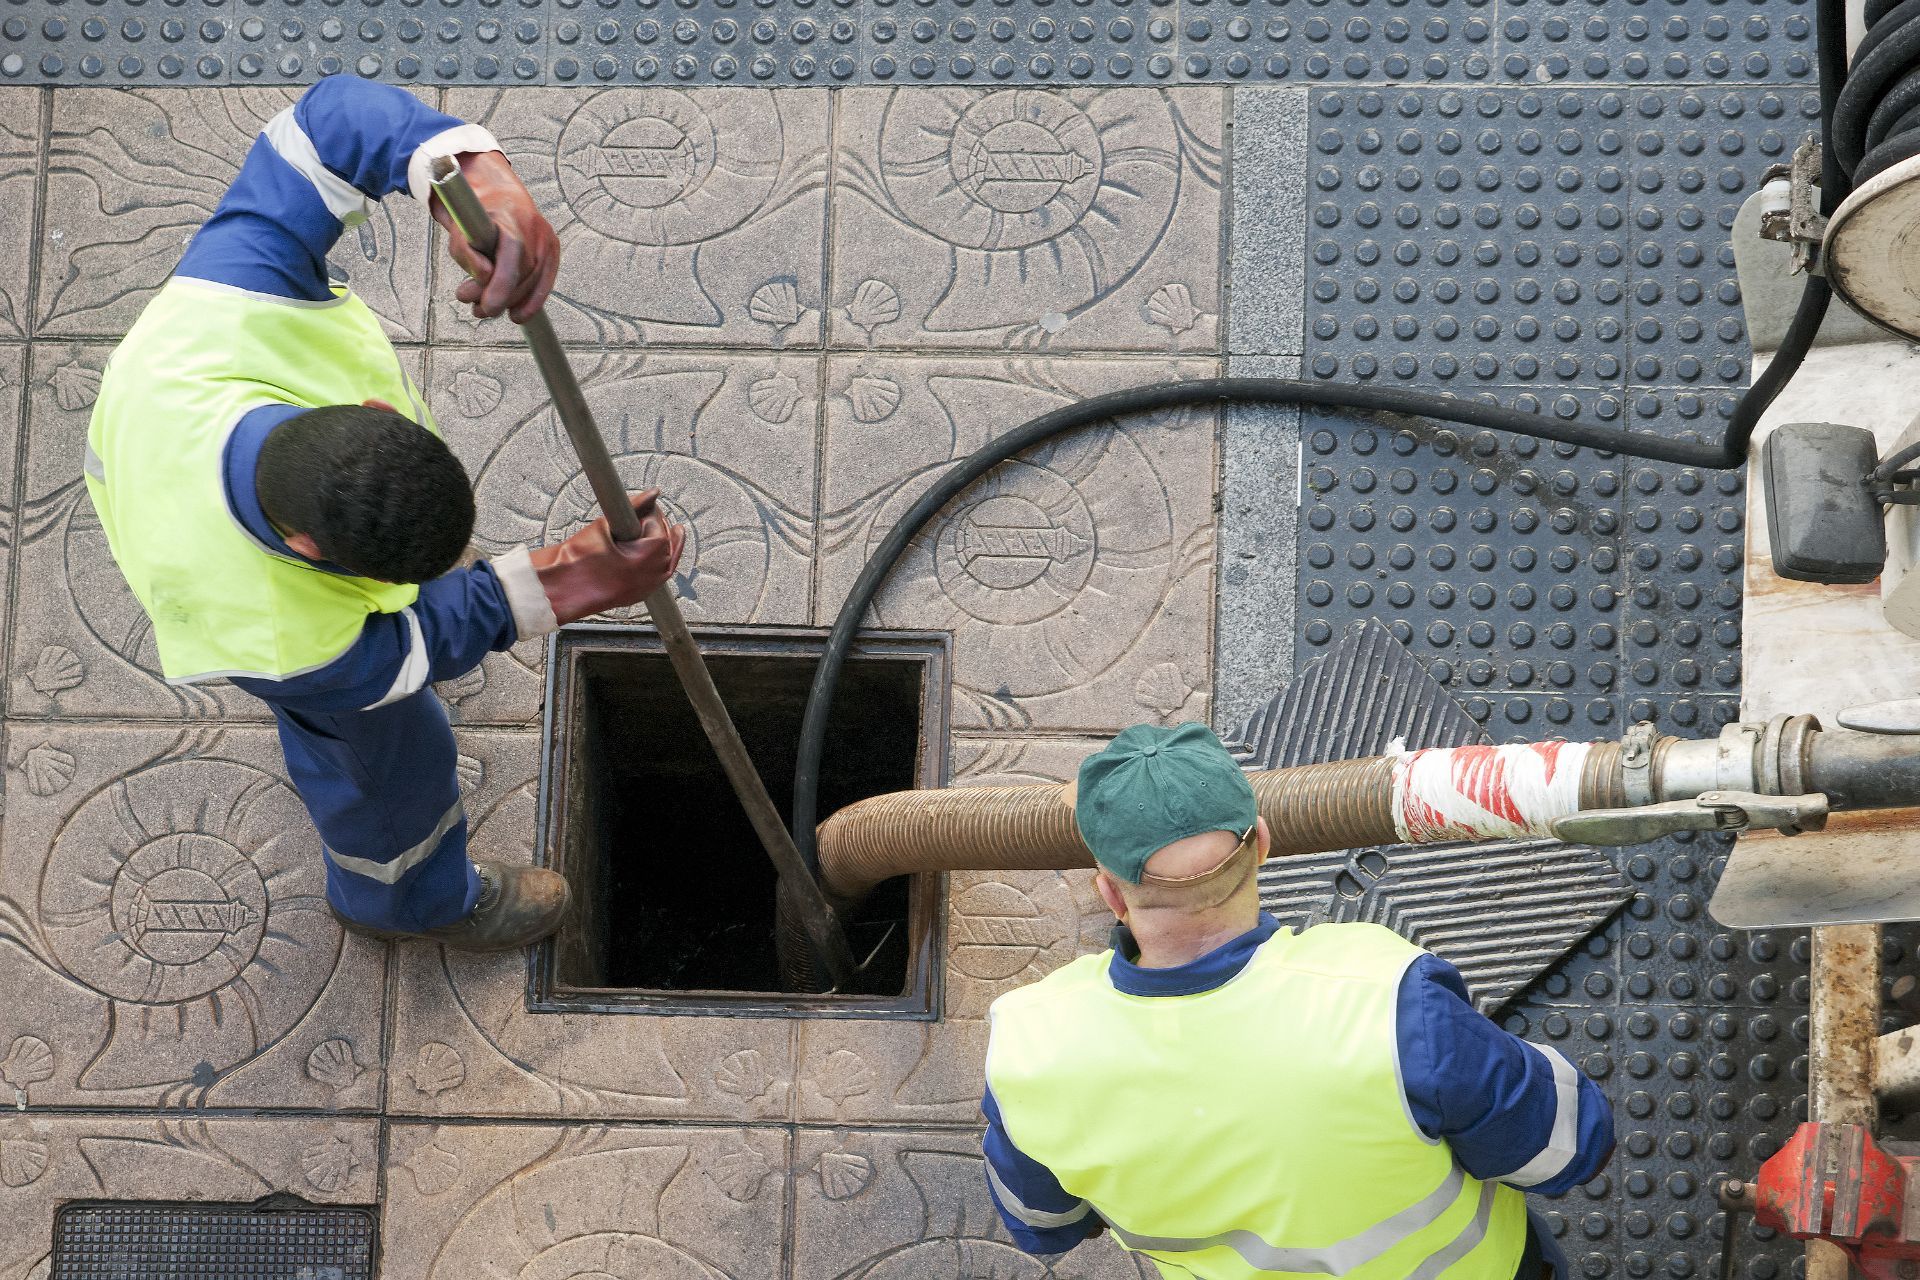 Workers cleaning drains from outside